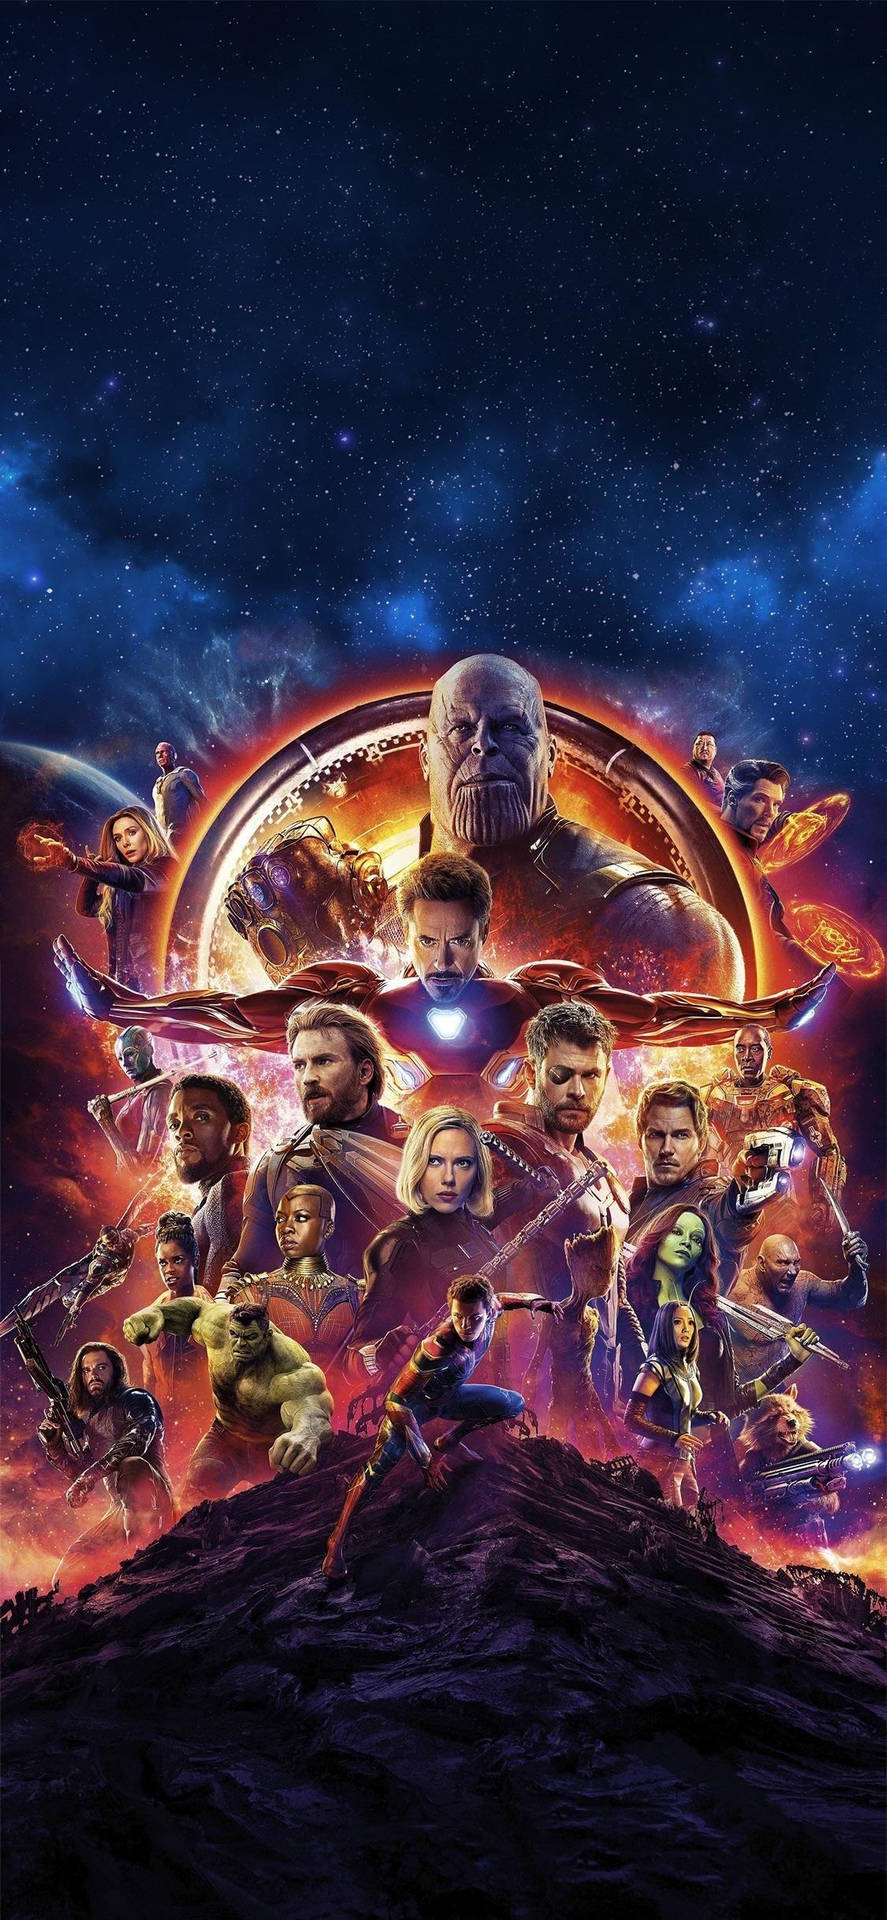 Avengers Infinity War Poster Marvel Iphone X Background